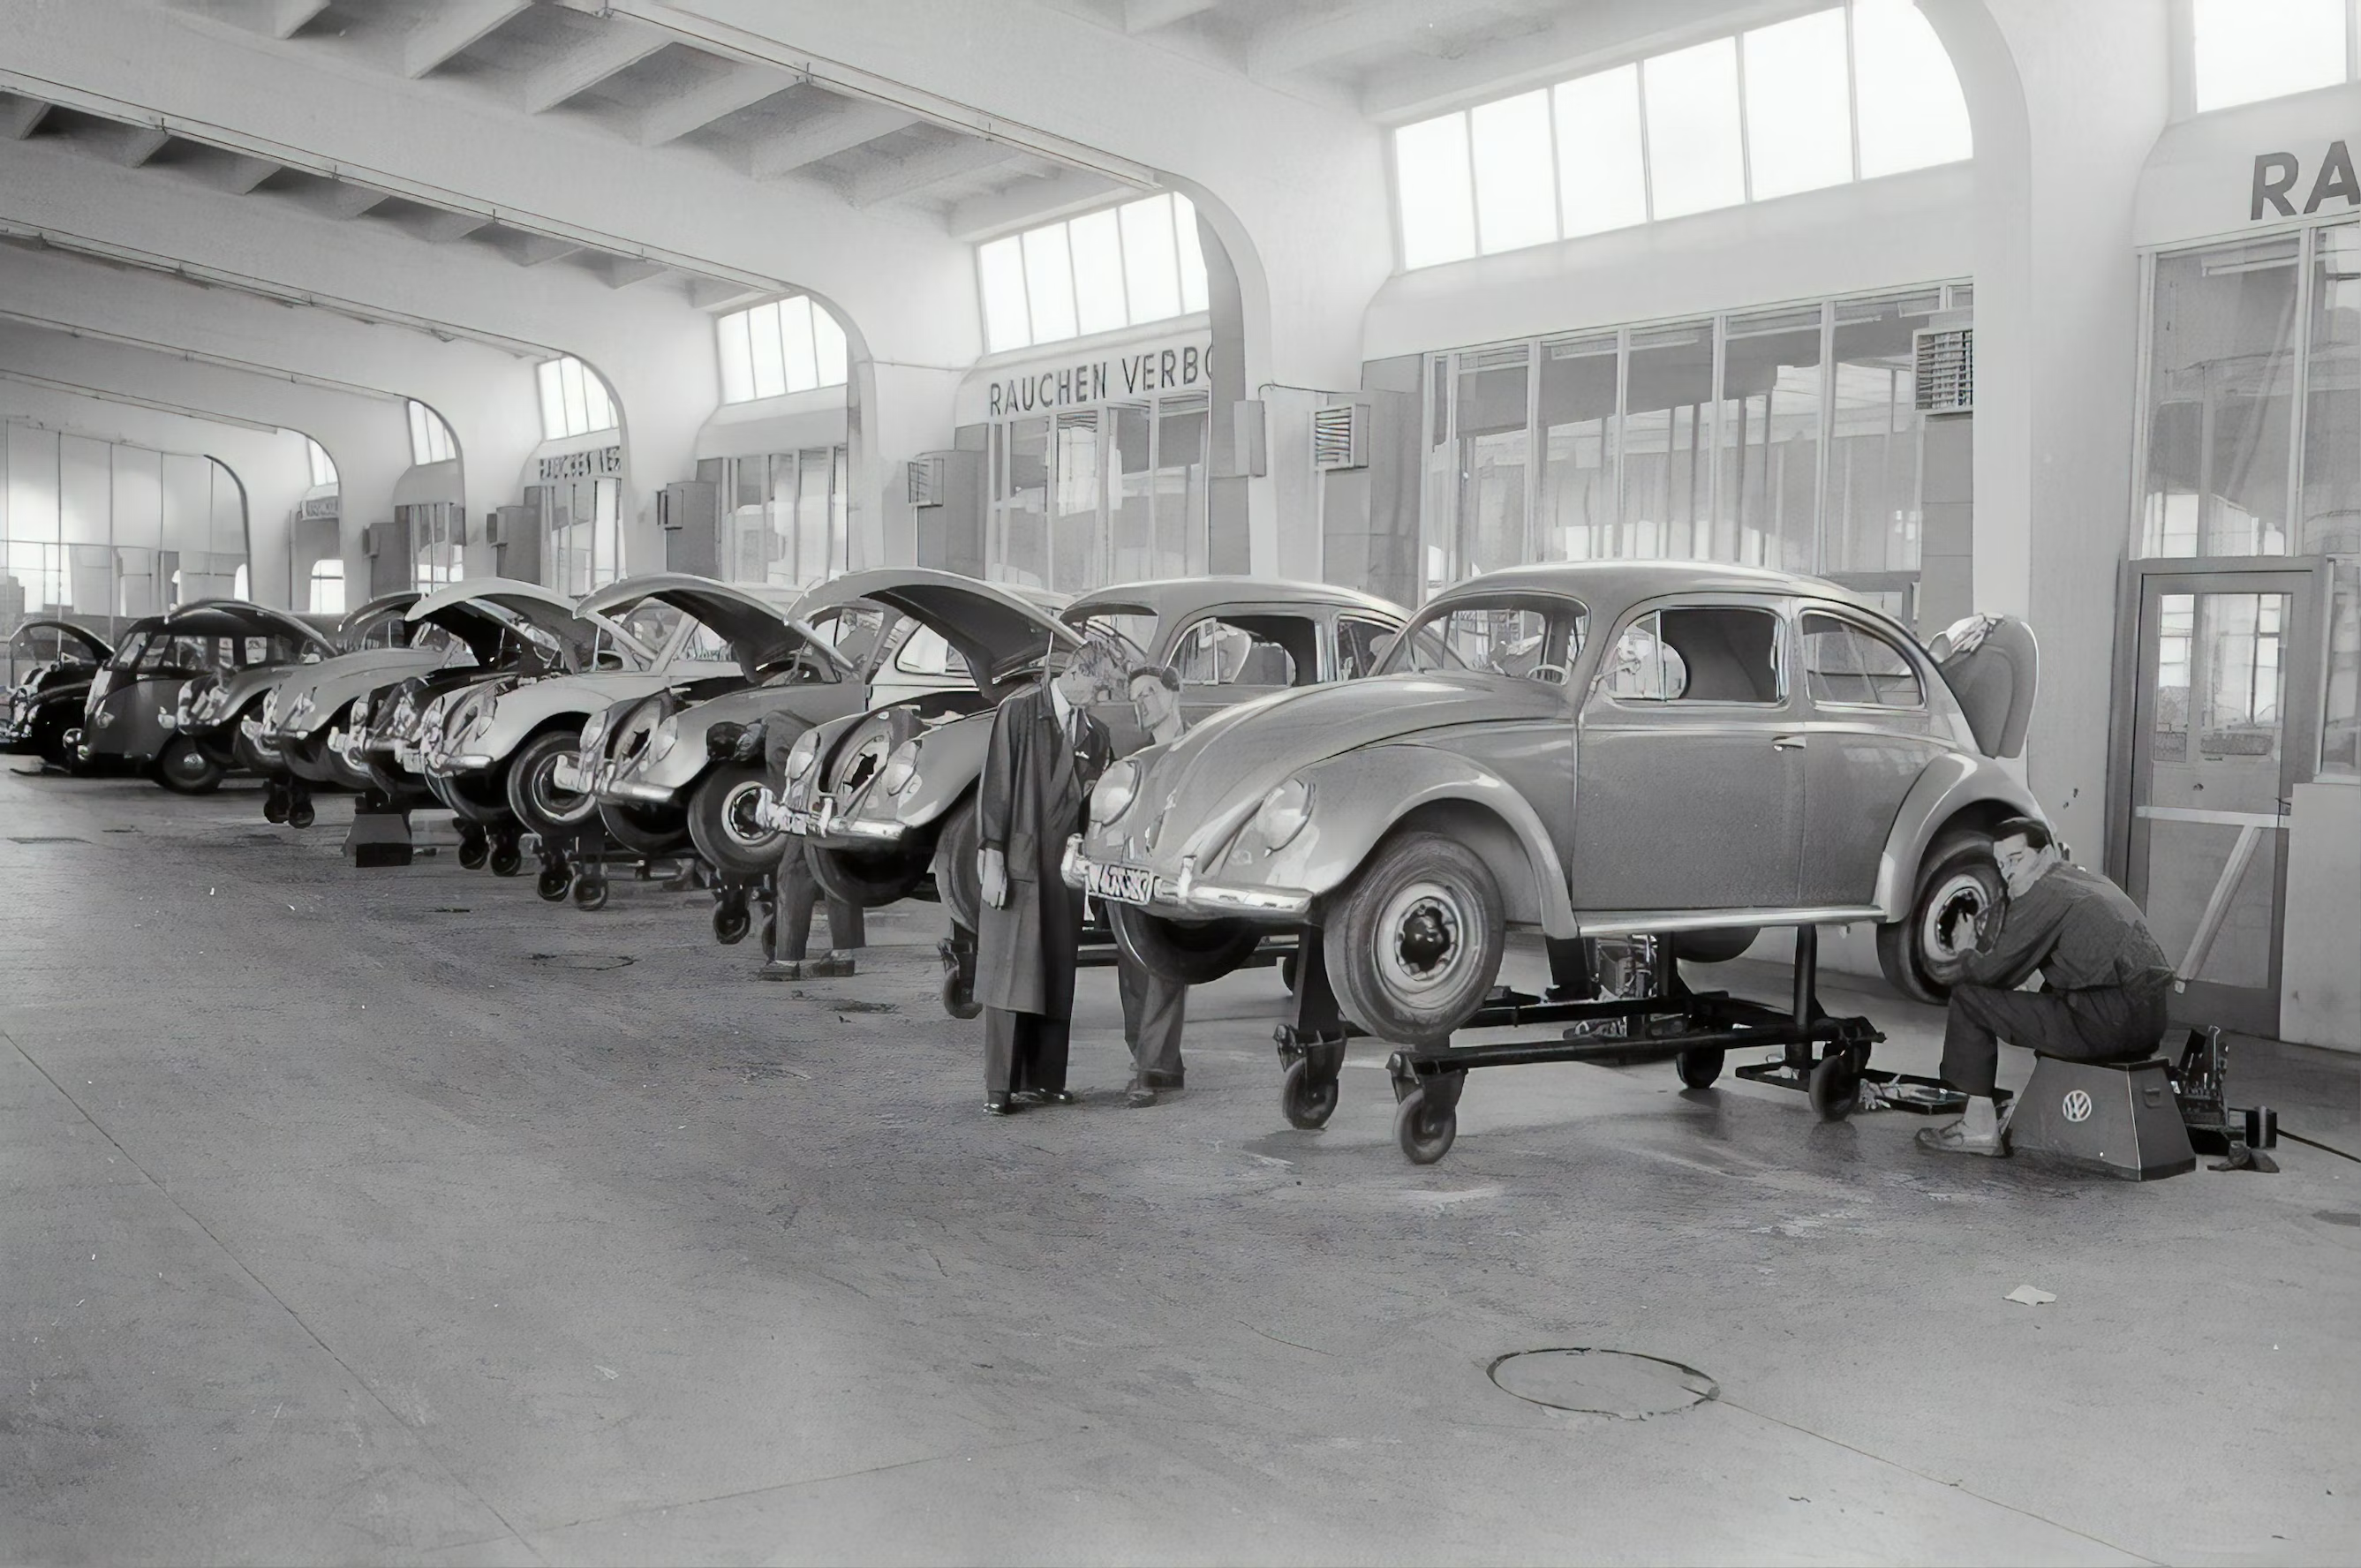 A VW Beetle assembly line - Credits to the Austrian National Library